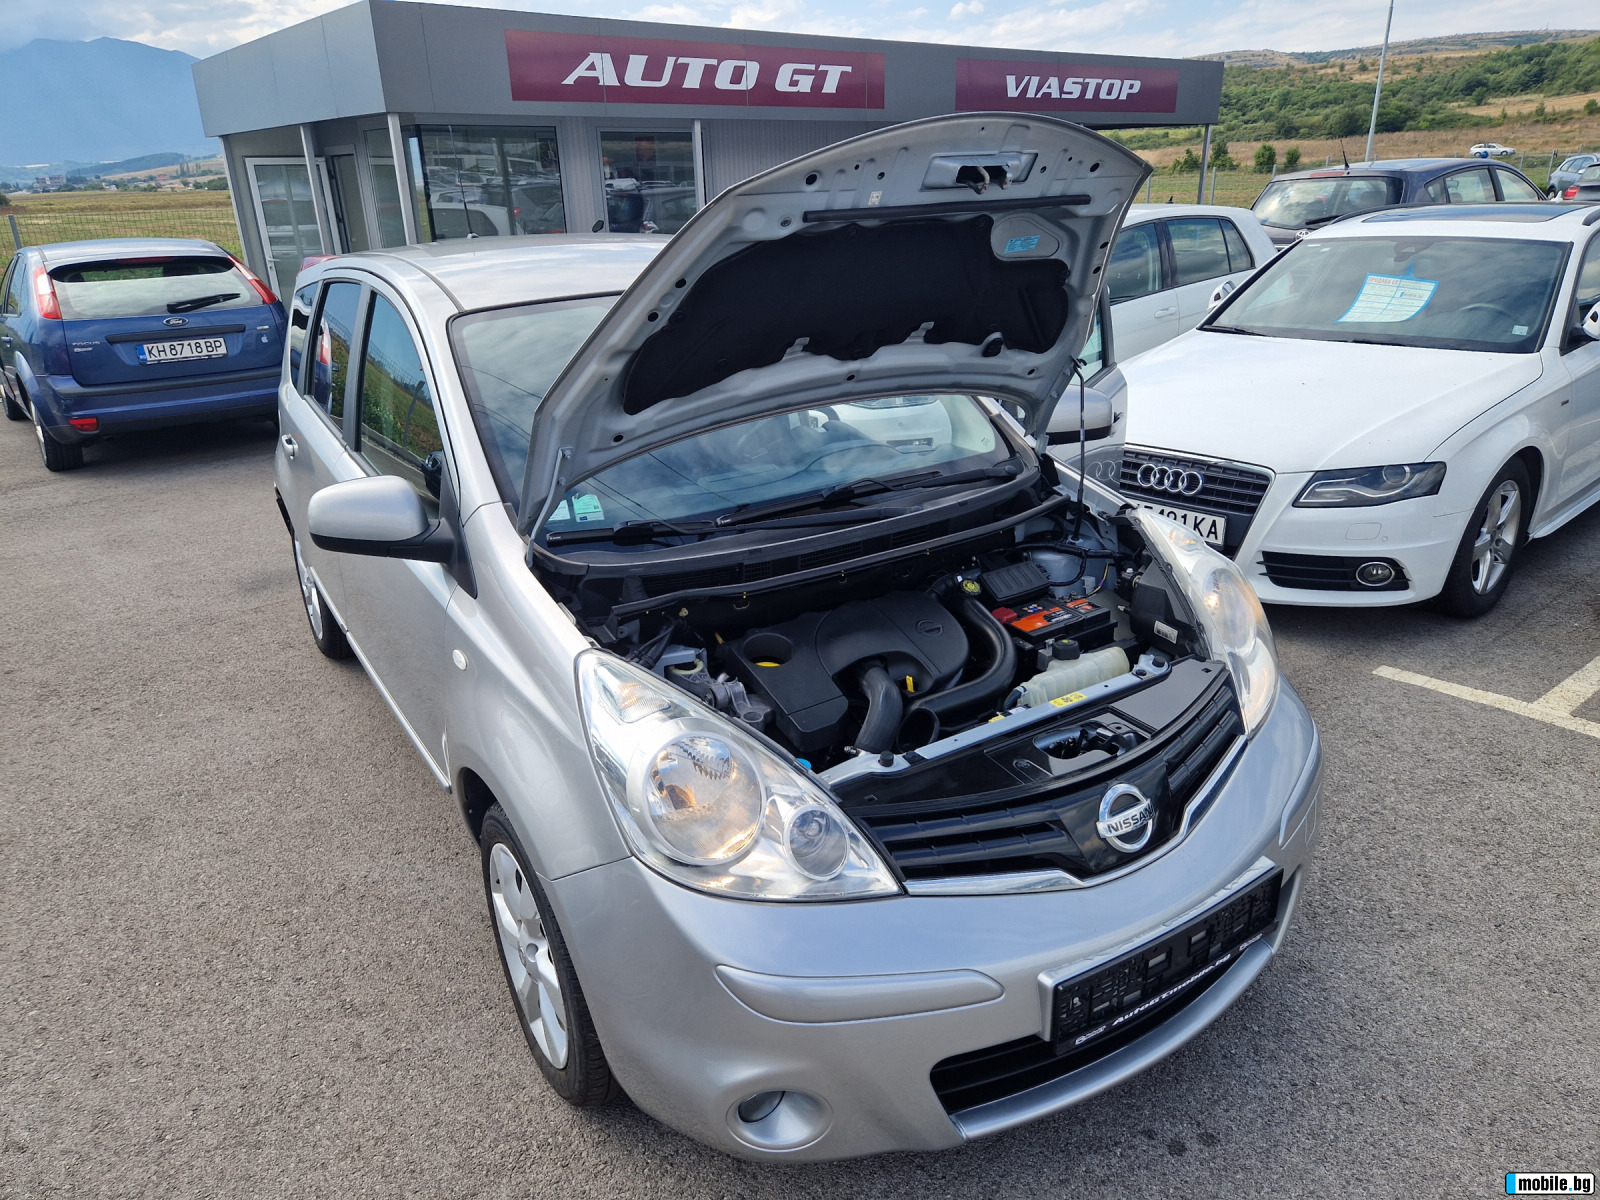 Nissan Note 1.5 DCI  | Mobile.bg   12